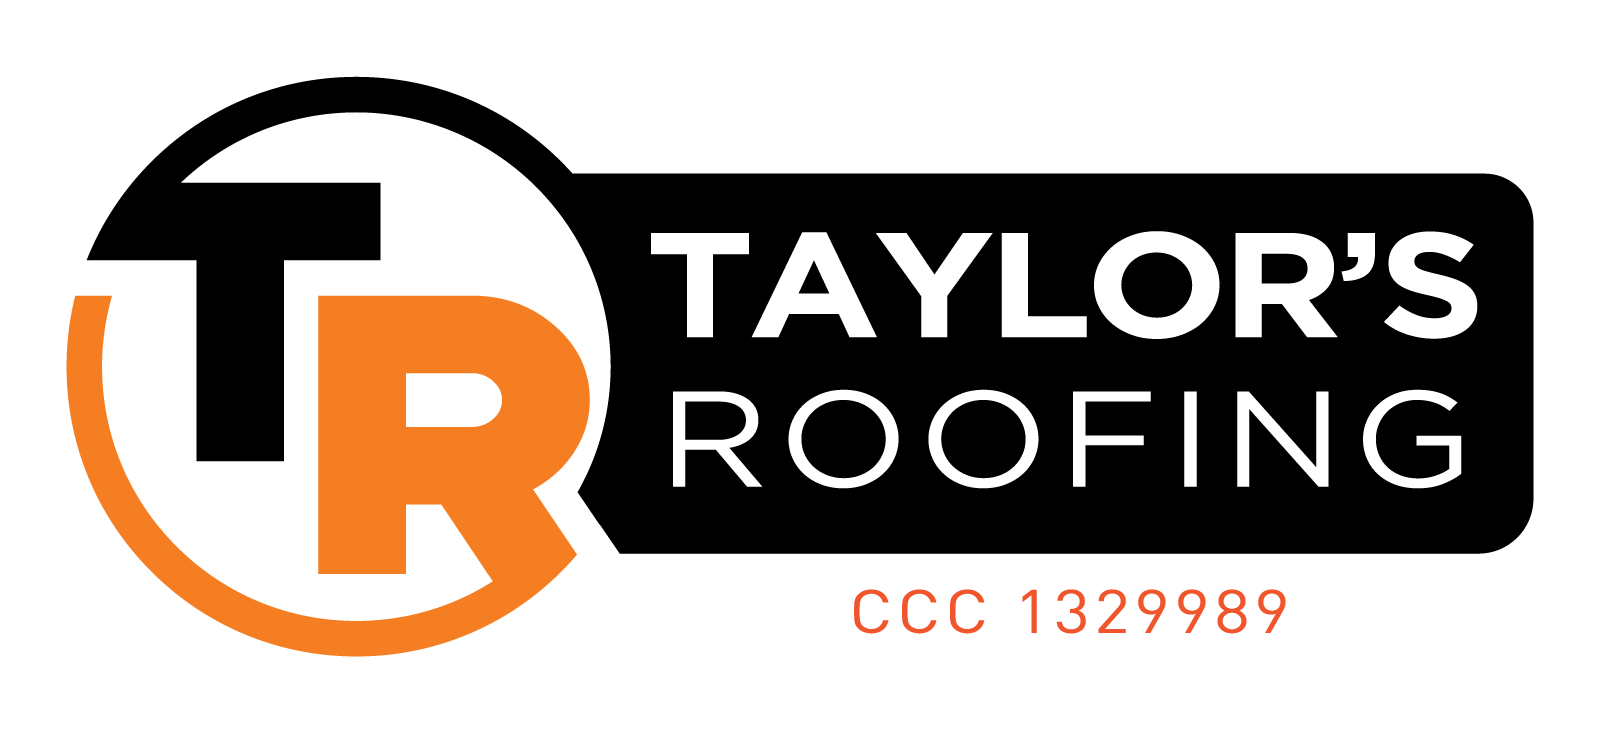 Taylor’s Roofing Currently Seeking Experienced, Highly Motivated ...